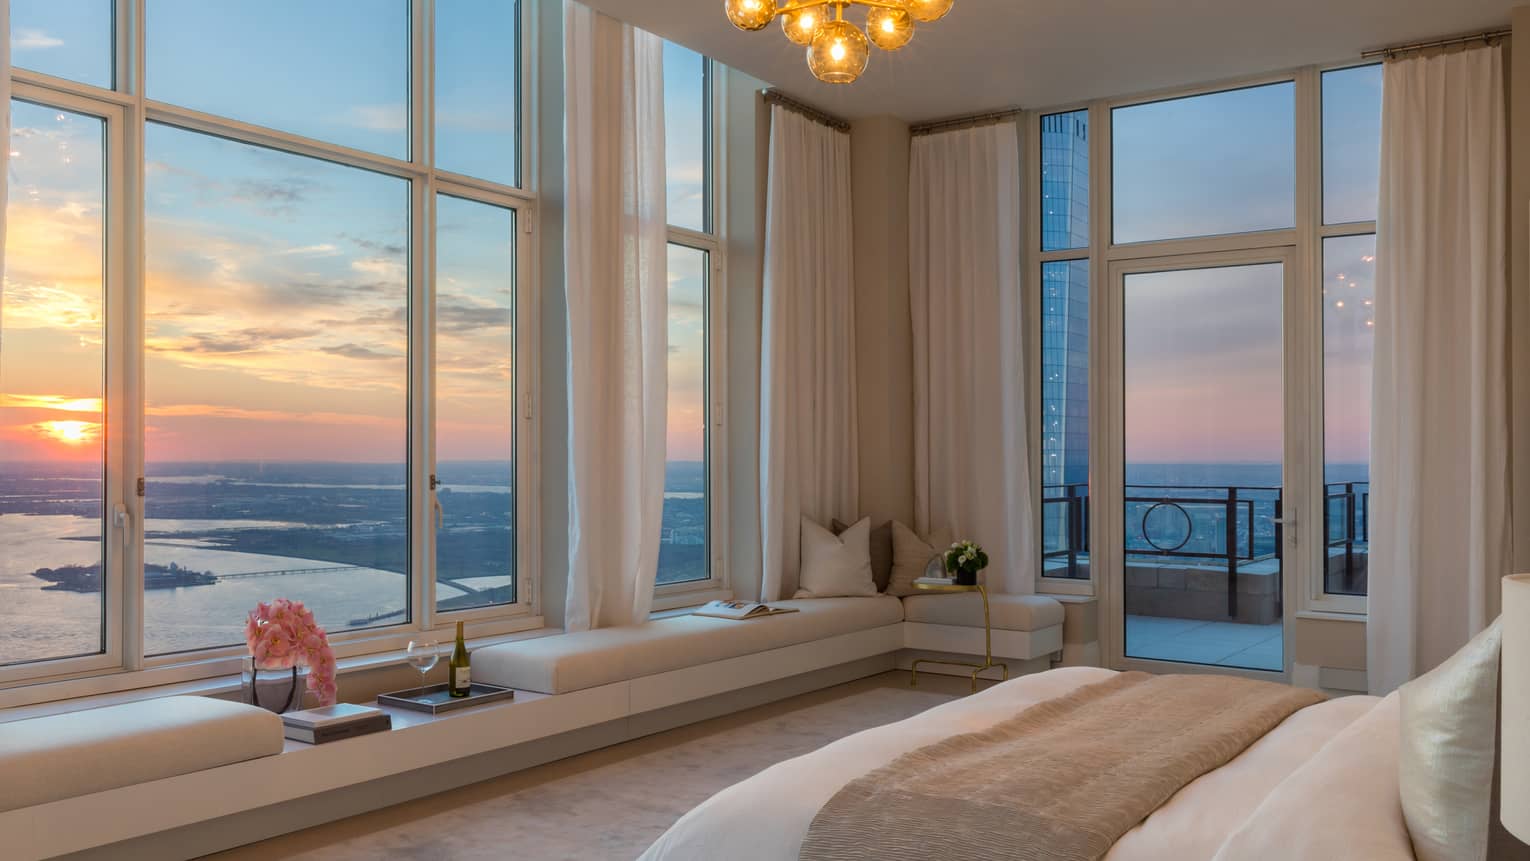 Bed with folded beige blanket across from corner picture windows, sunset views